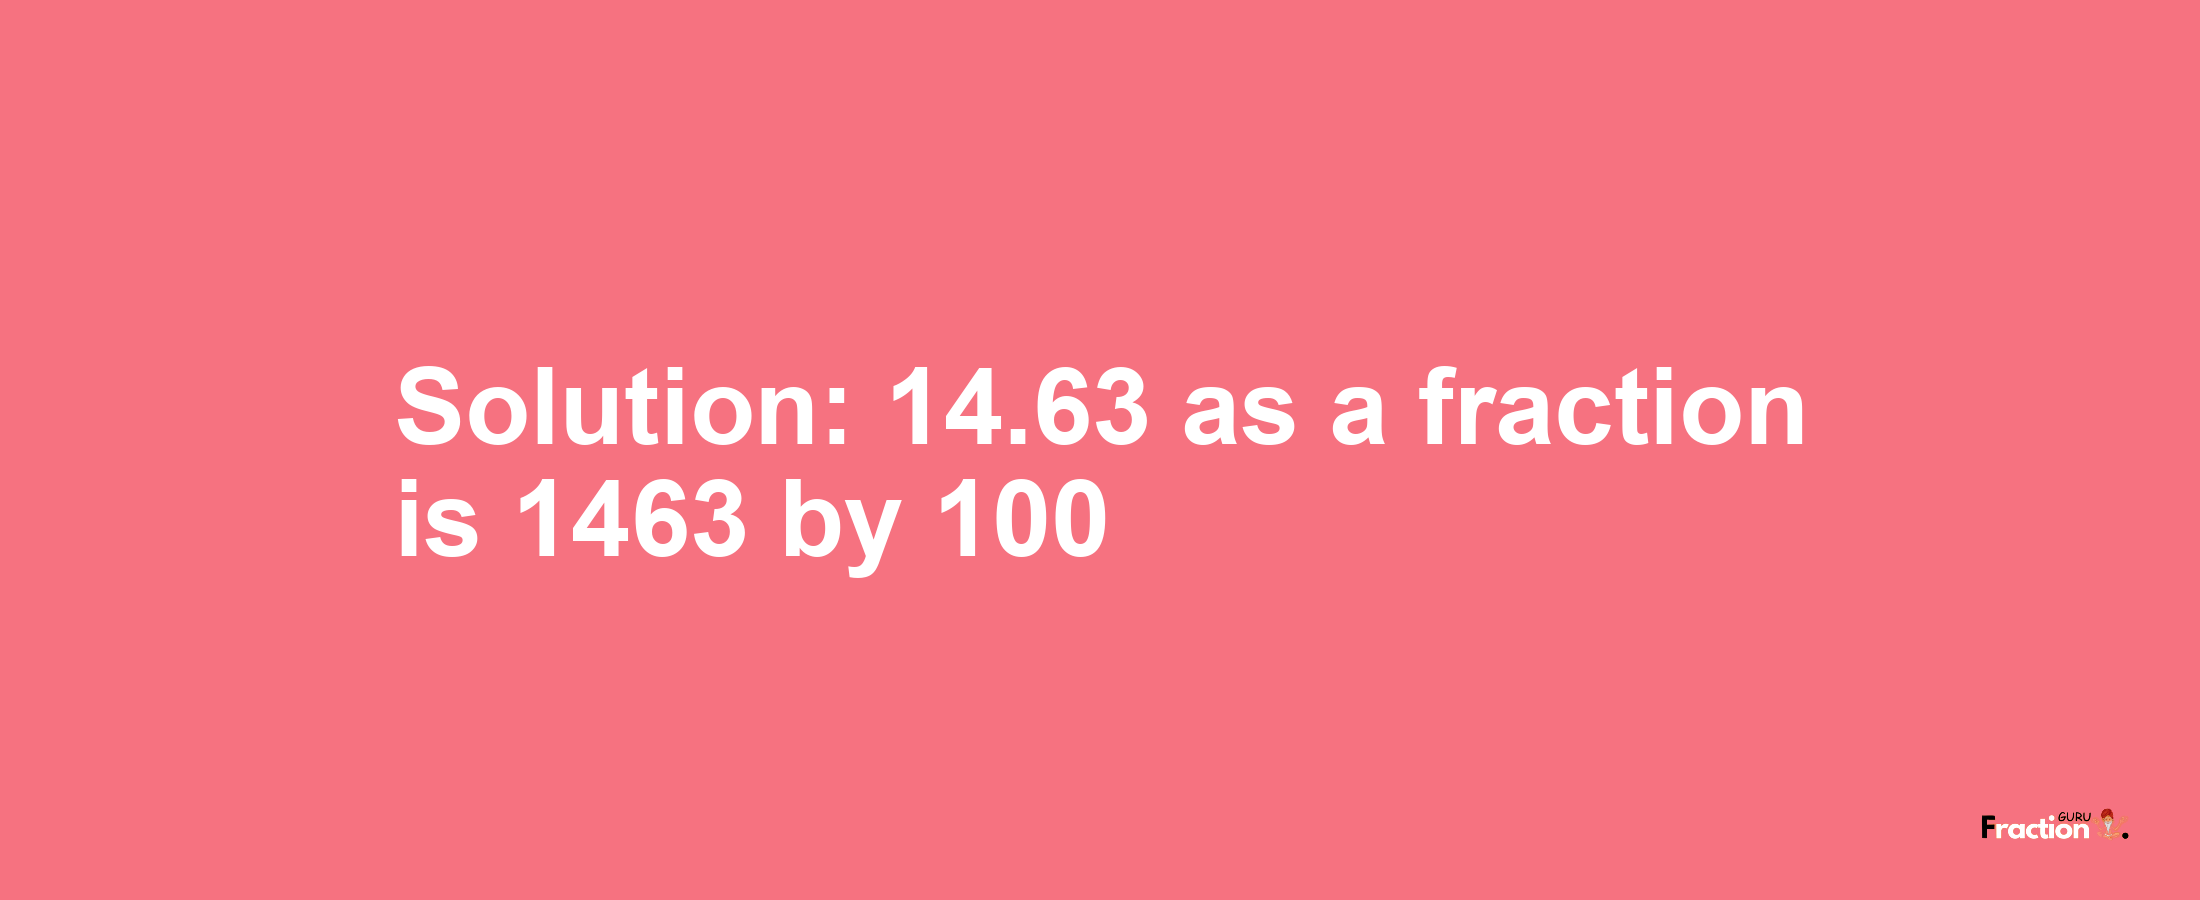 Solution:14.63 as a fraction is 1463/100